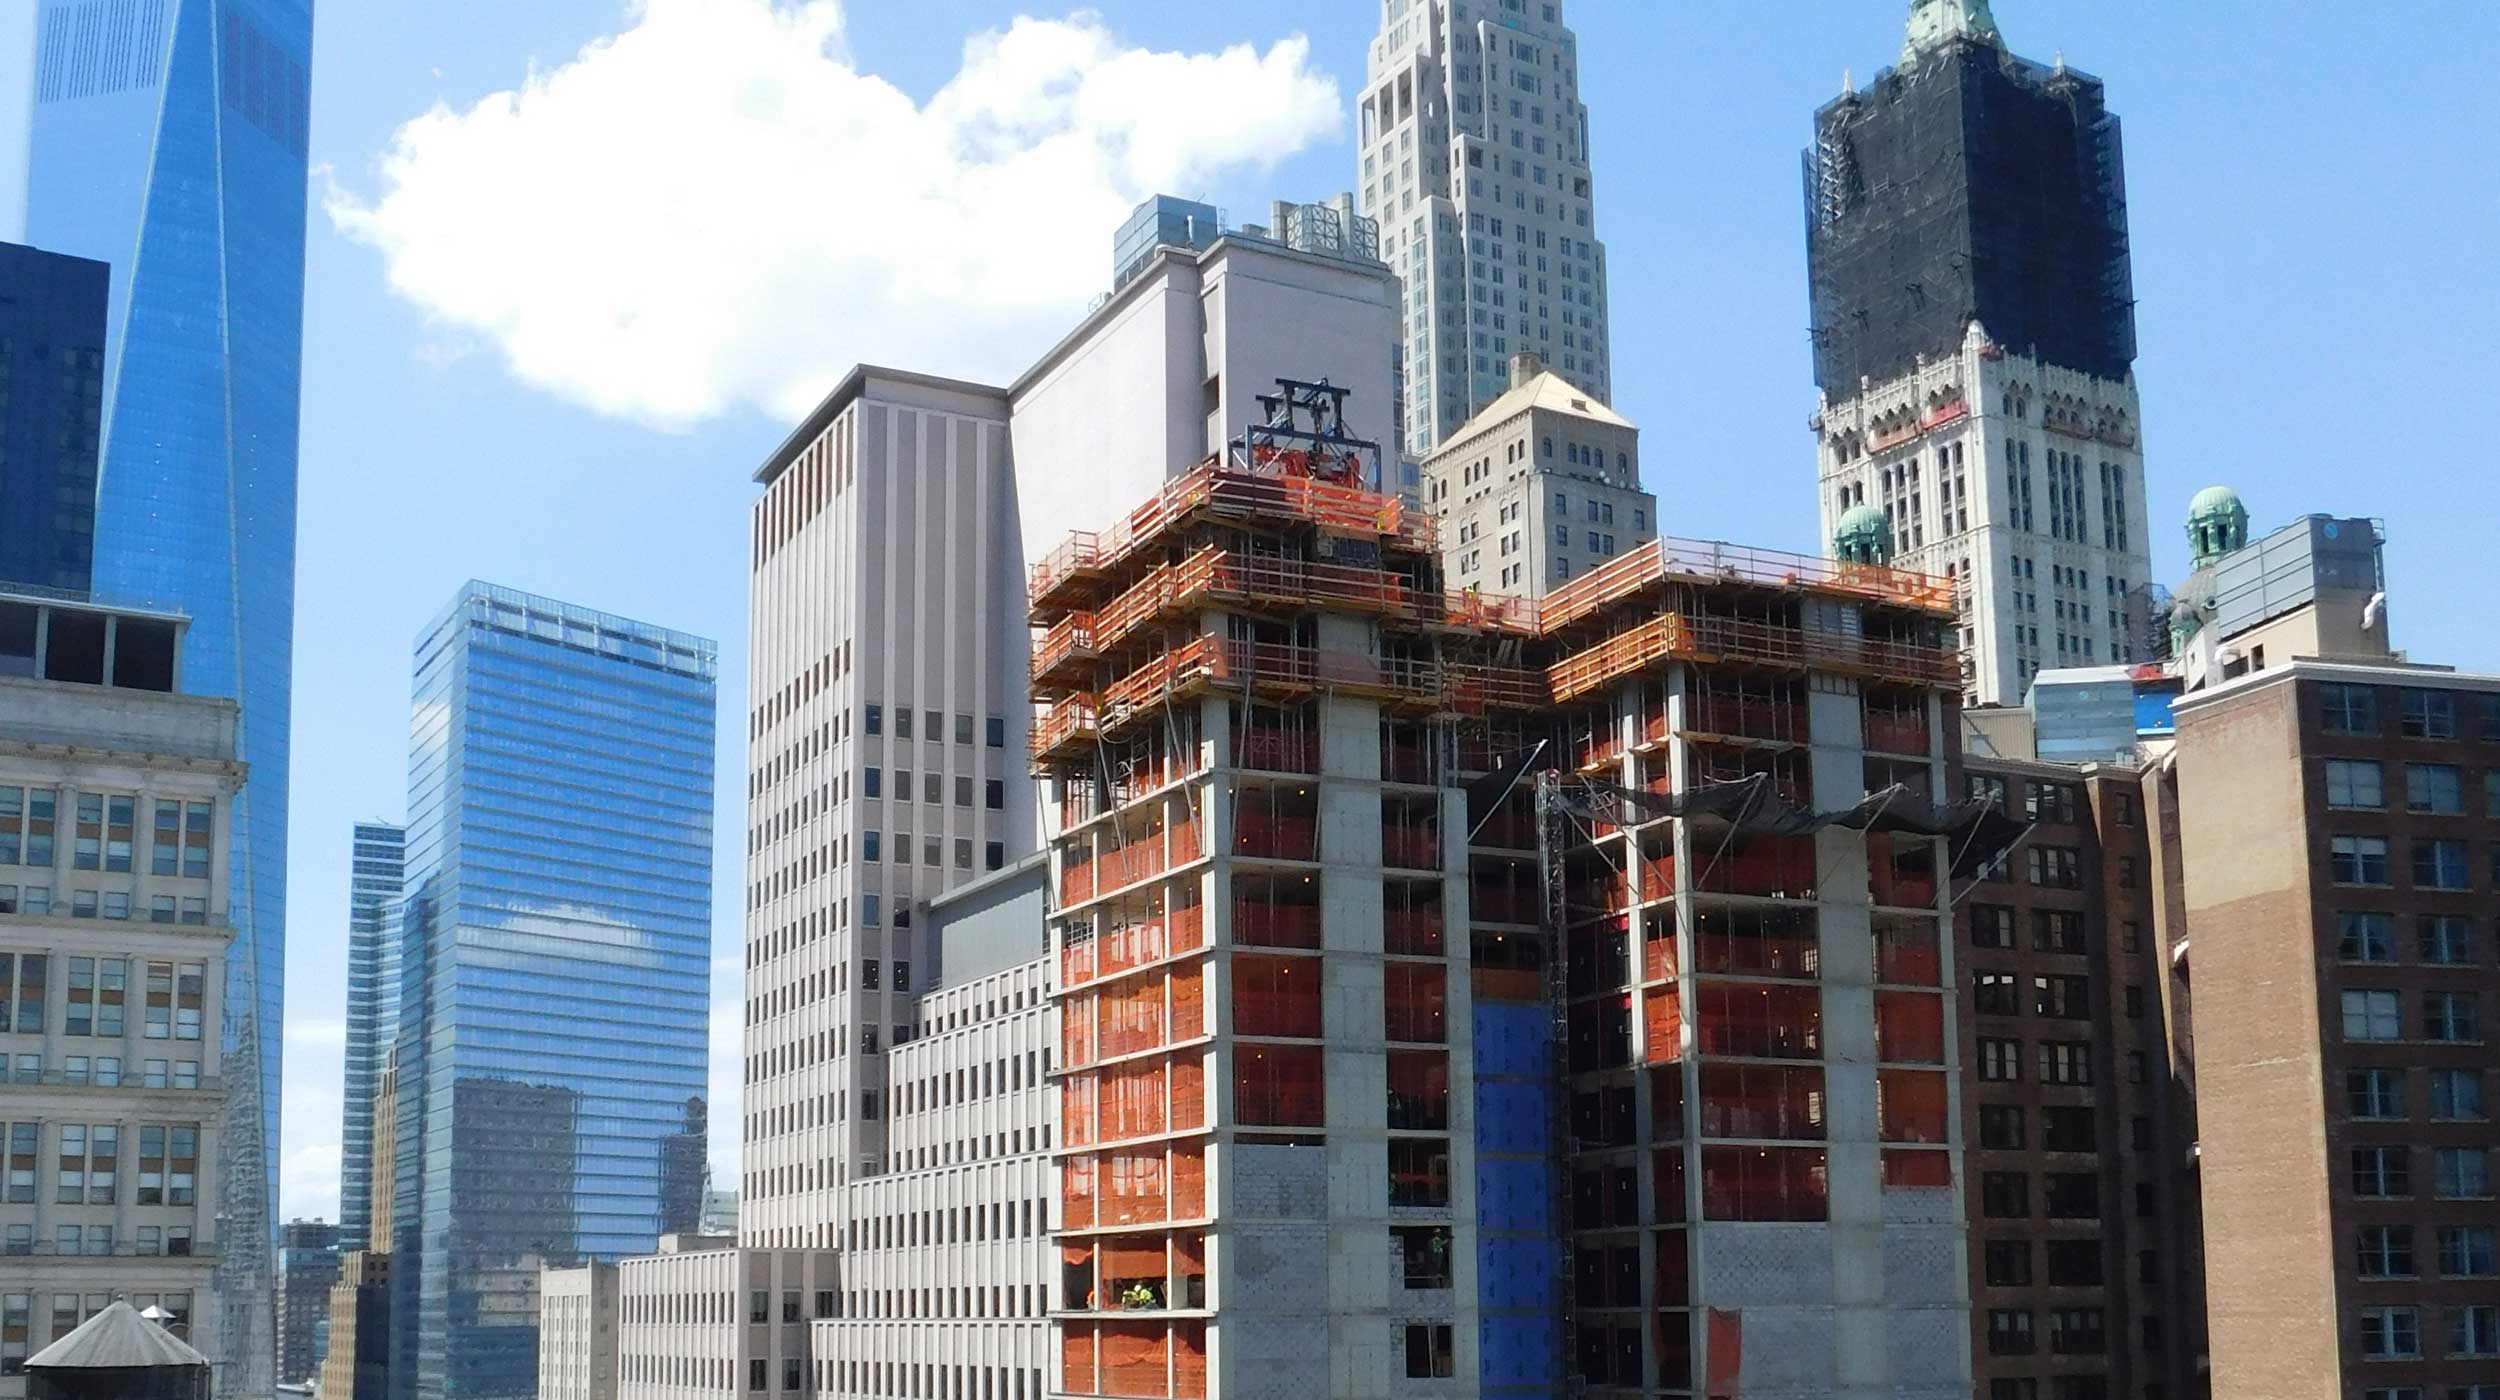 26 Ann Street represents one of the largest mixed-use projects underway near Fulton Street.